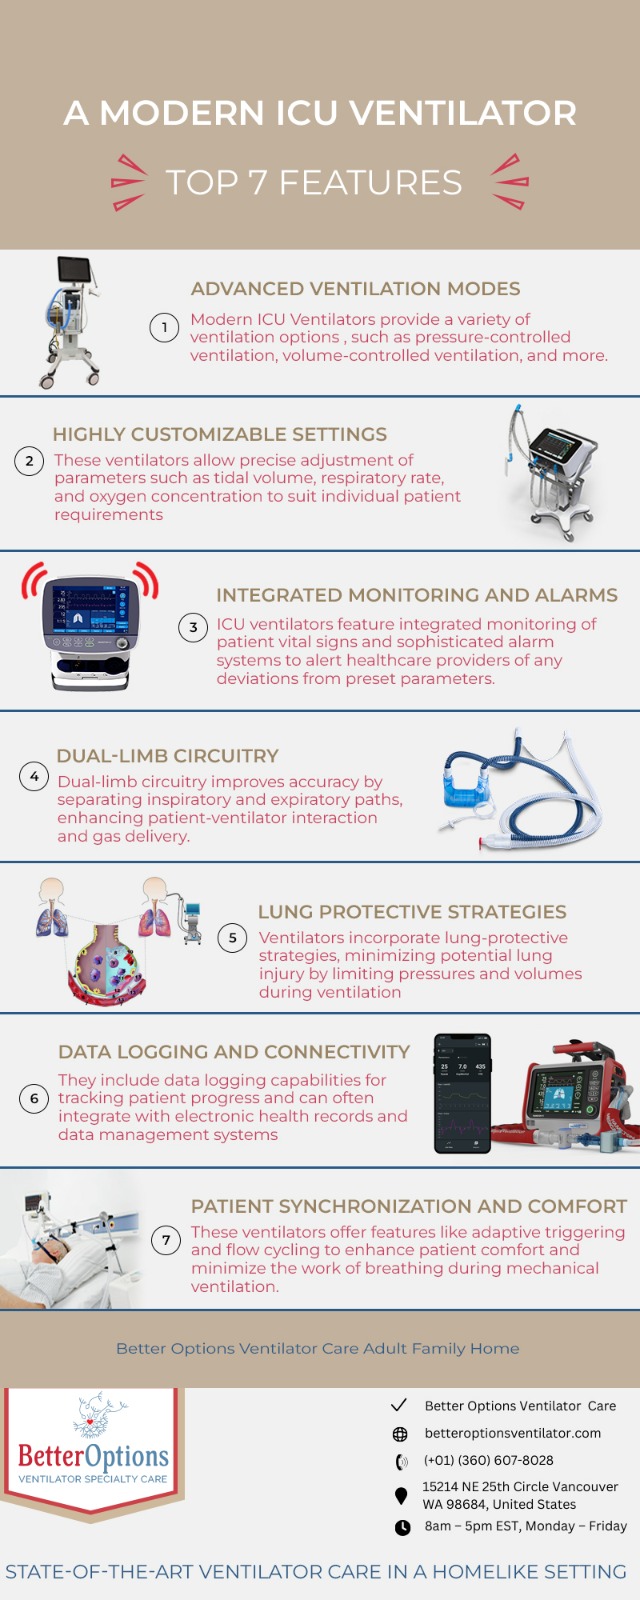 Infographic showing top 7 features of a modern ICU Ventilator